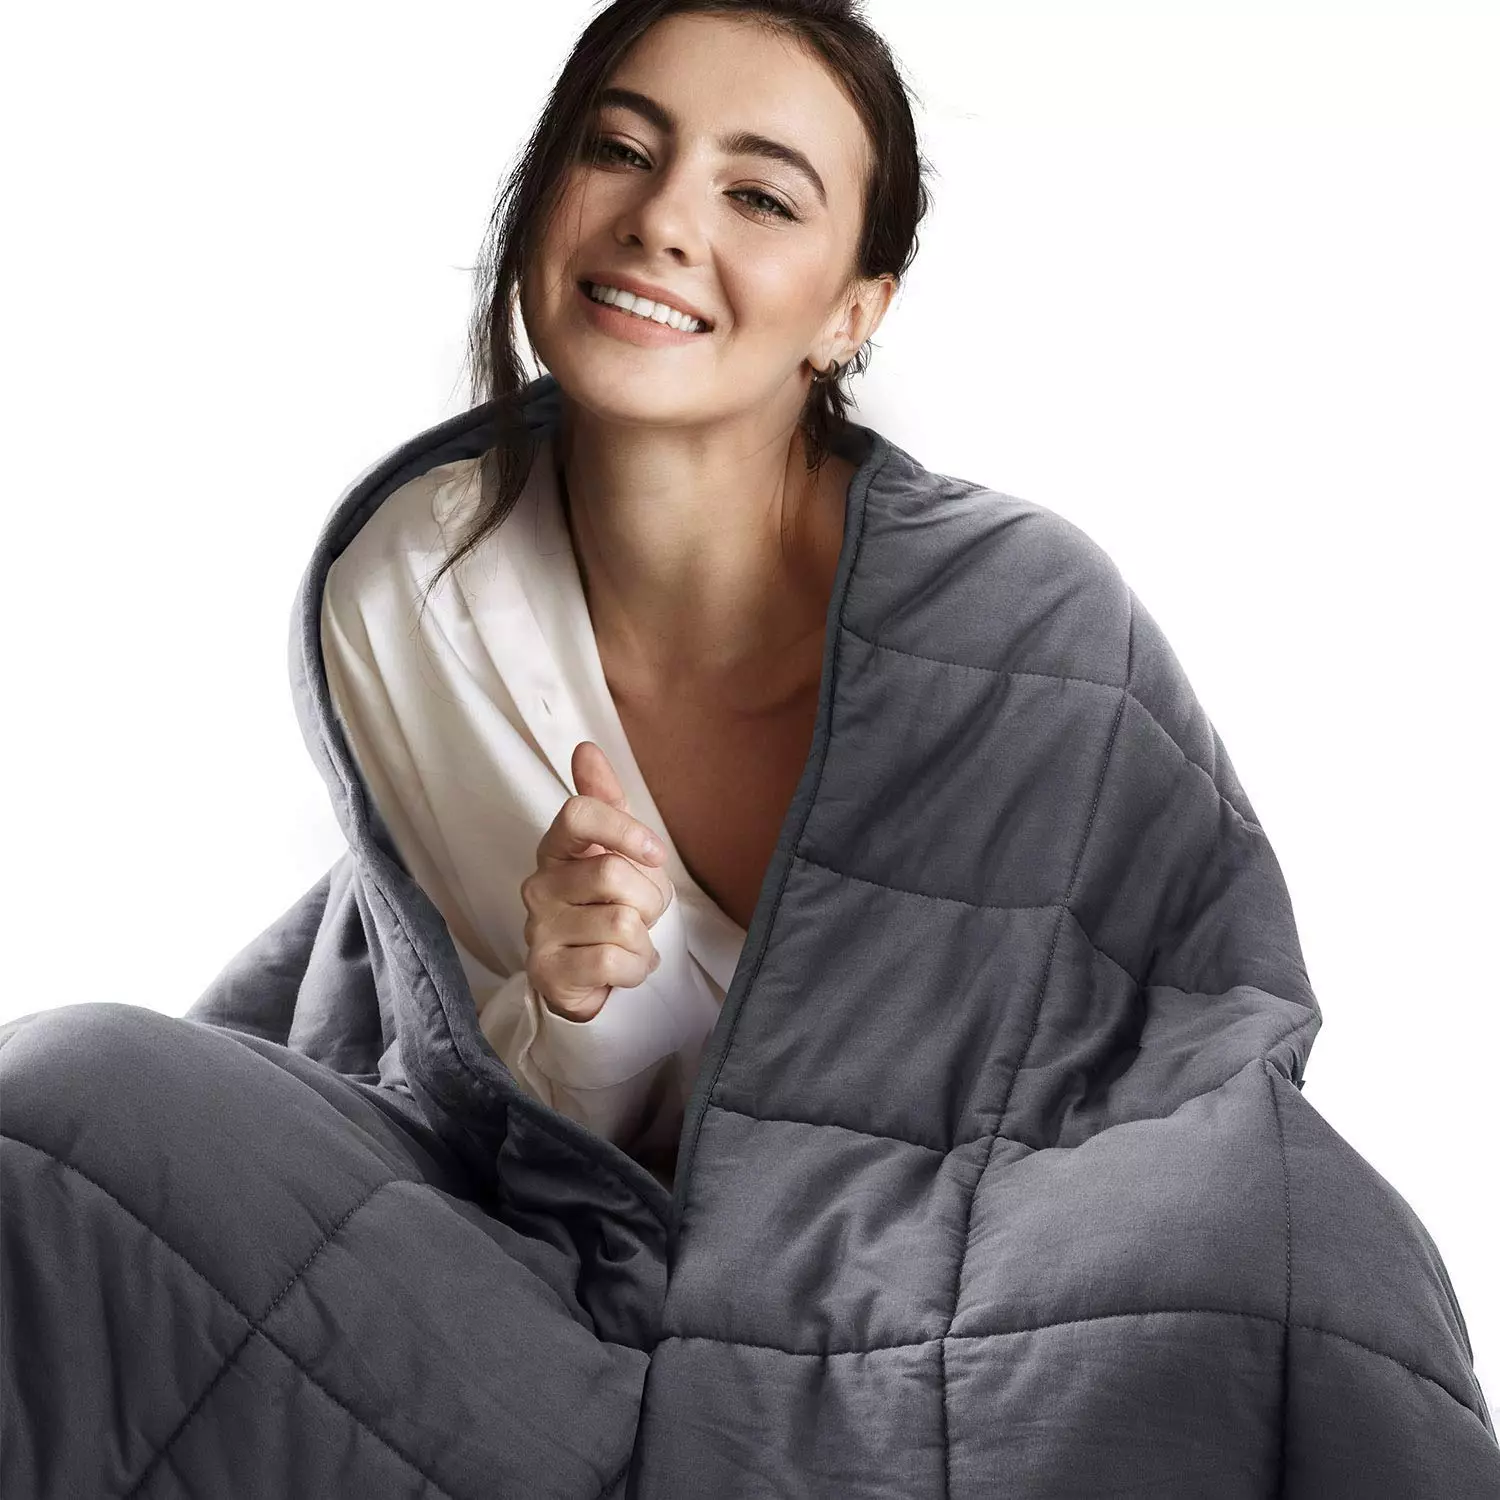 The weighted blanket has an "earthing" effect, helping to ground the body as you drift off to sleep (